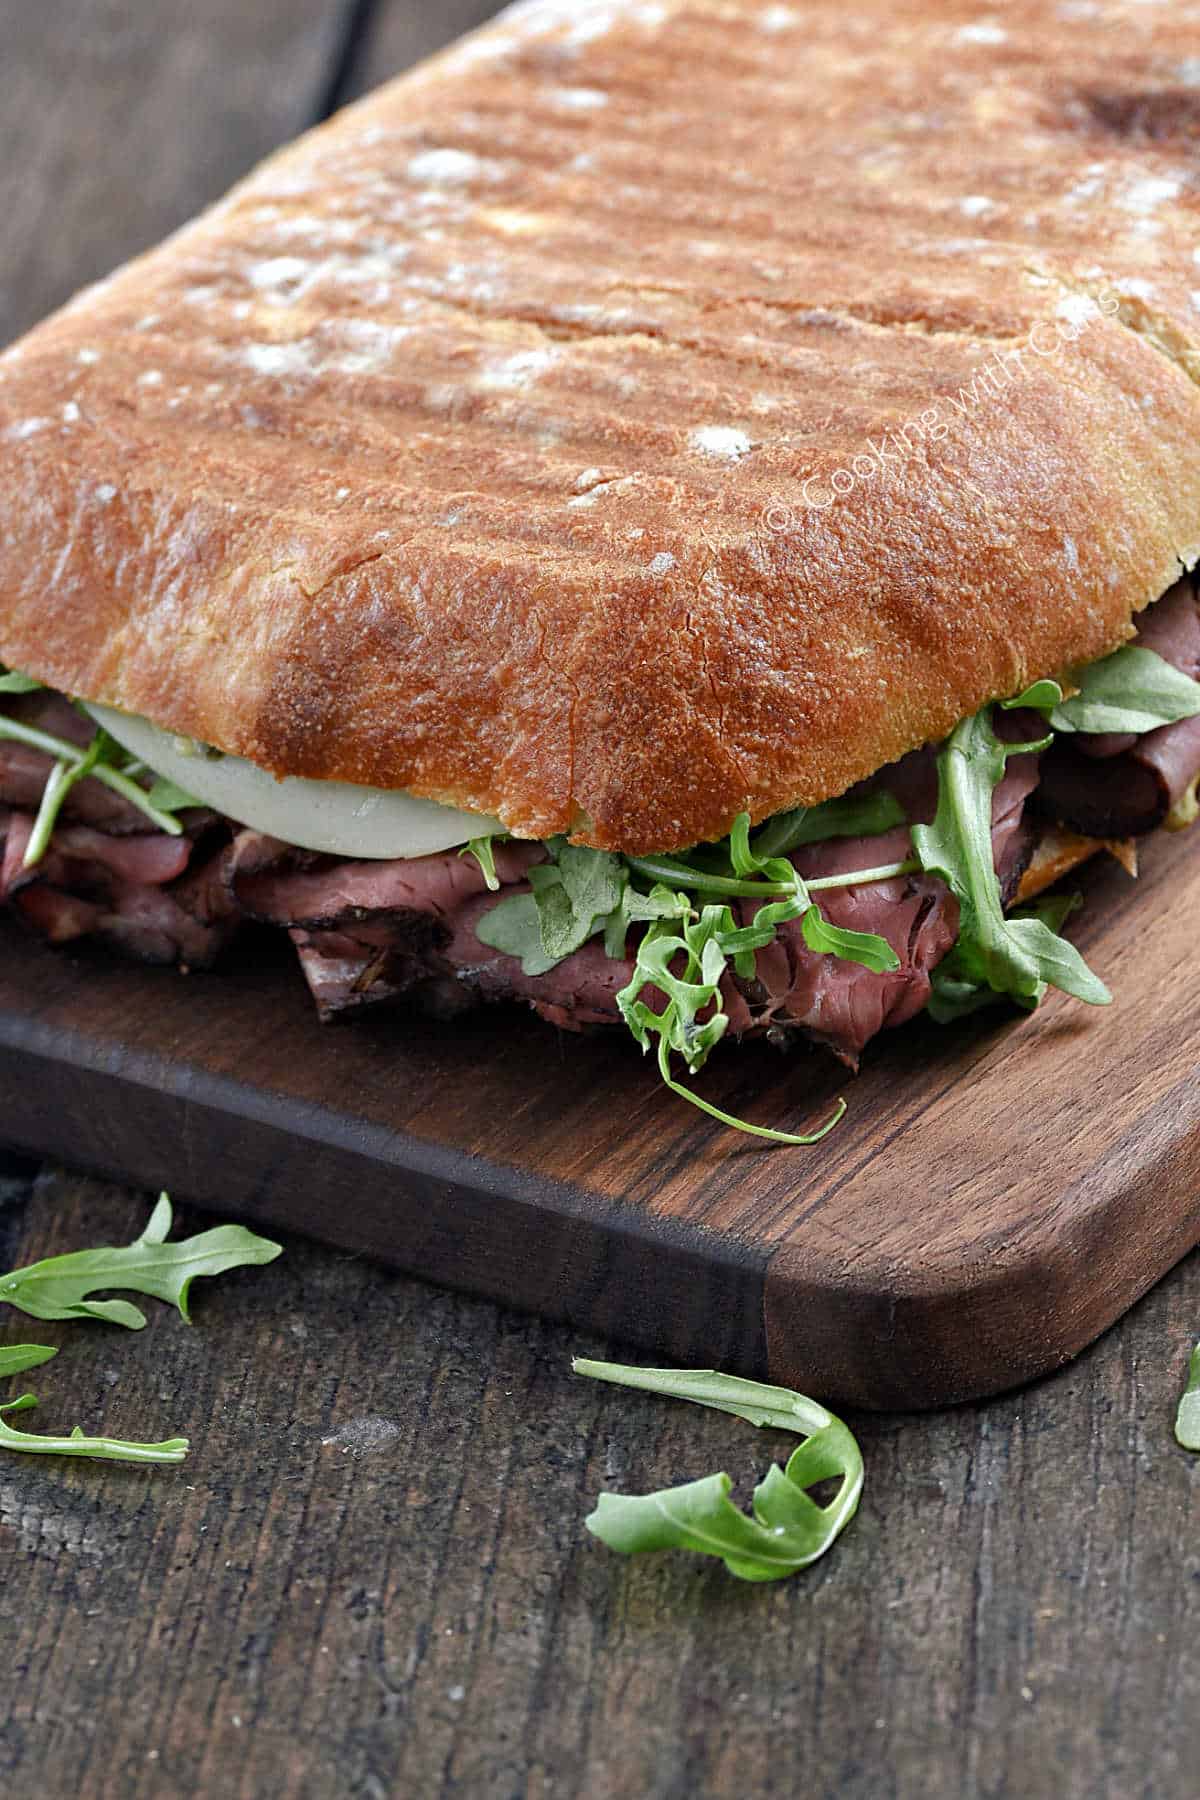 A grilled roast beef panini sandwich on a wooden serving board.